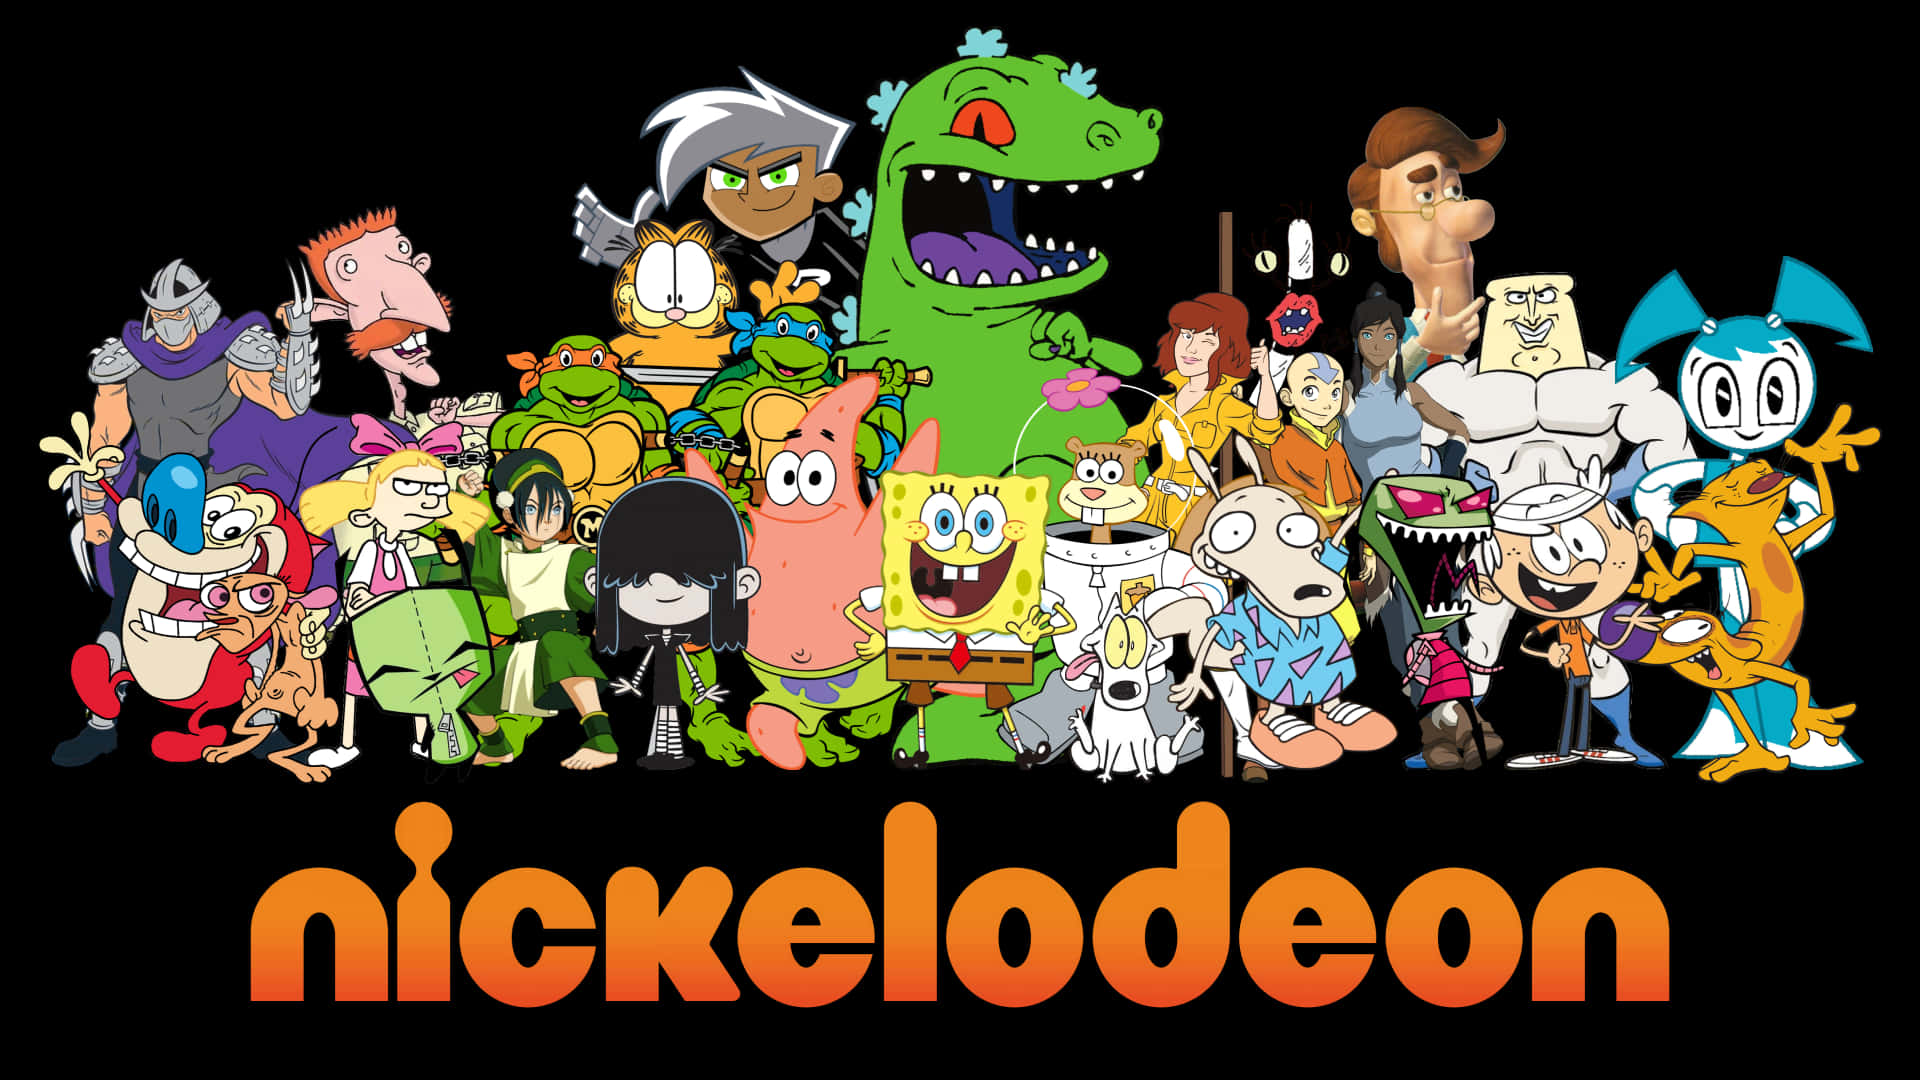 Get Ready To Laugh With Nickelodeon!